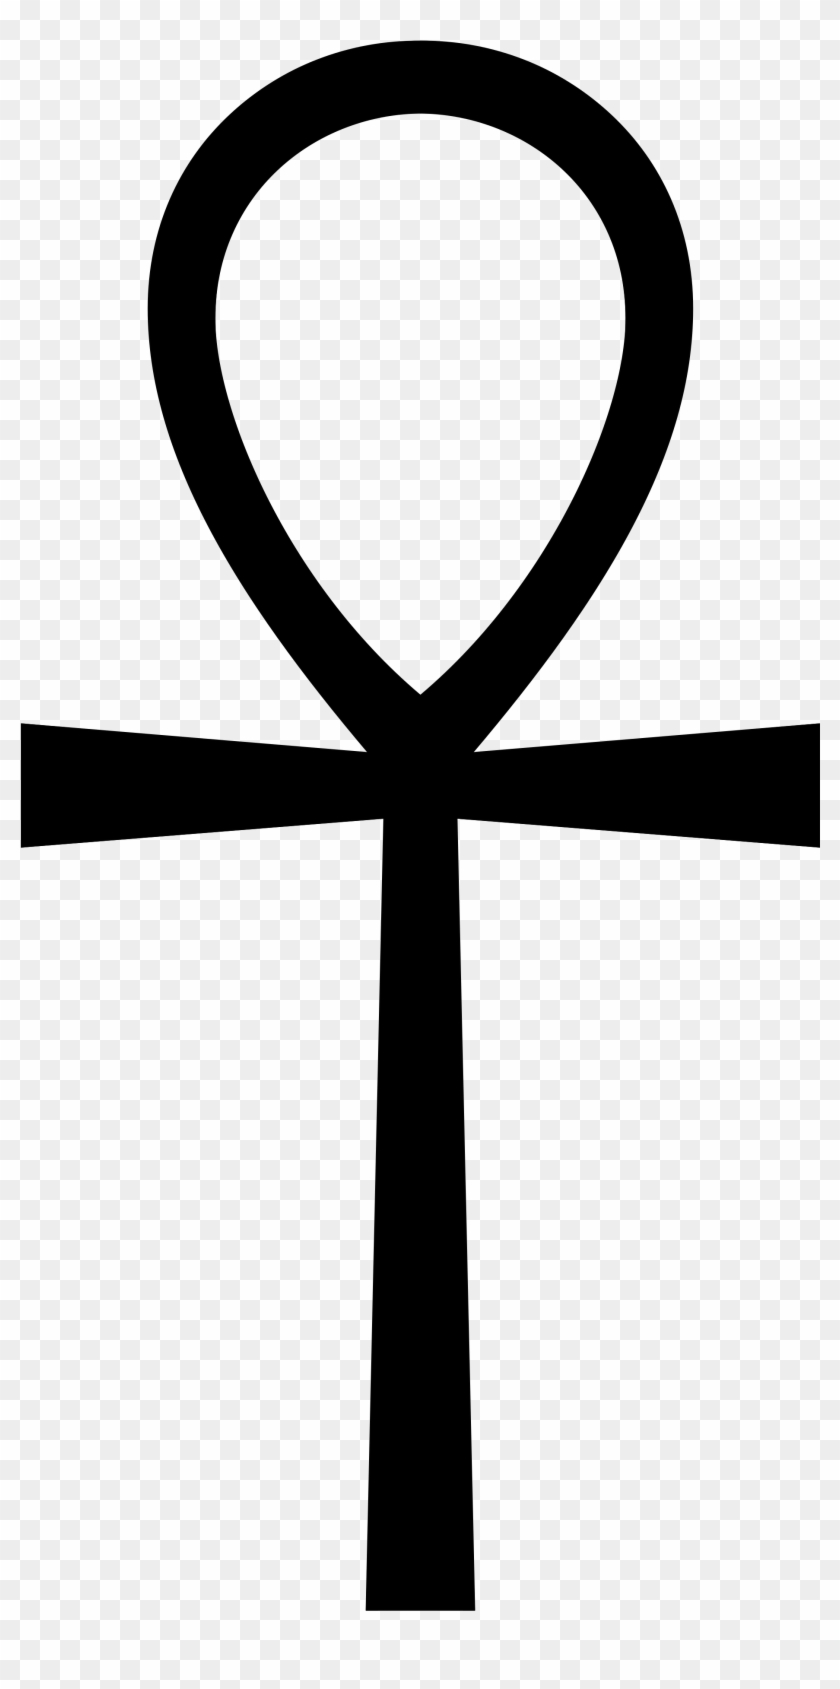 Ankh - Does The Cross With A Circle Mean #207960